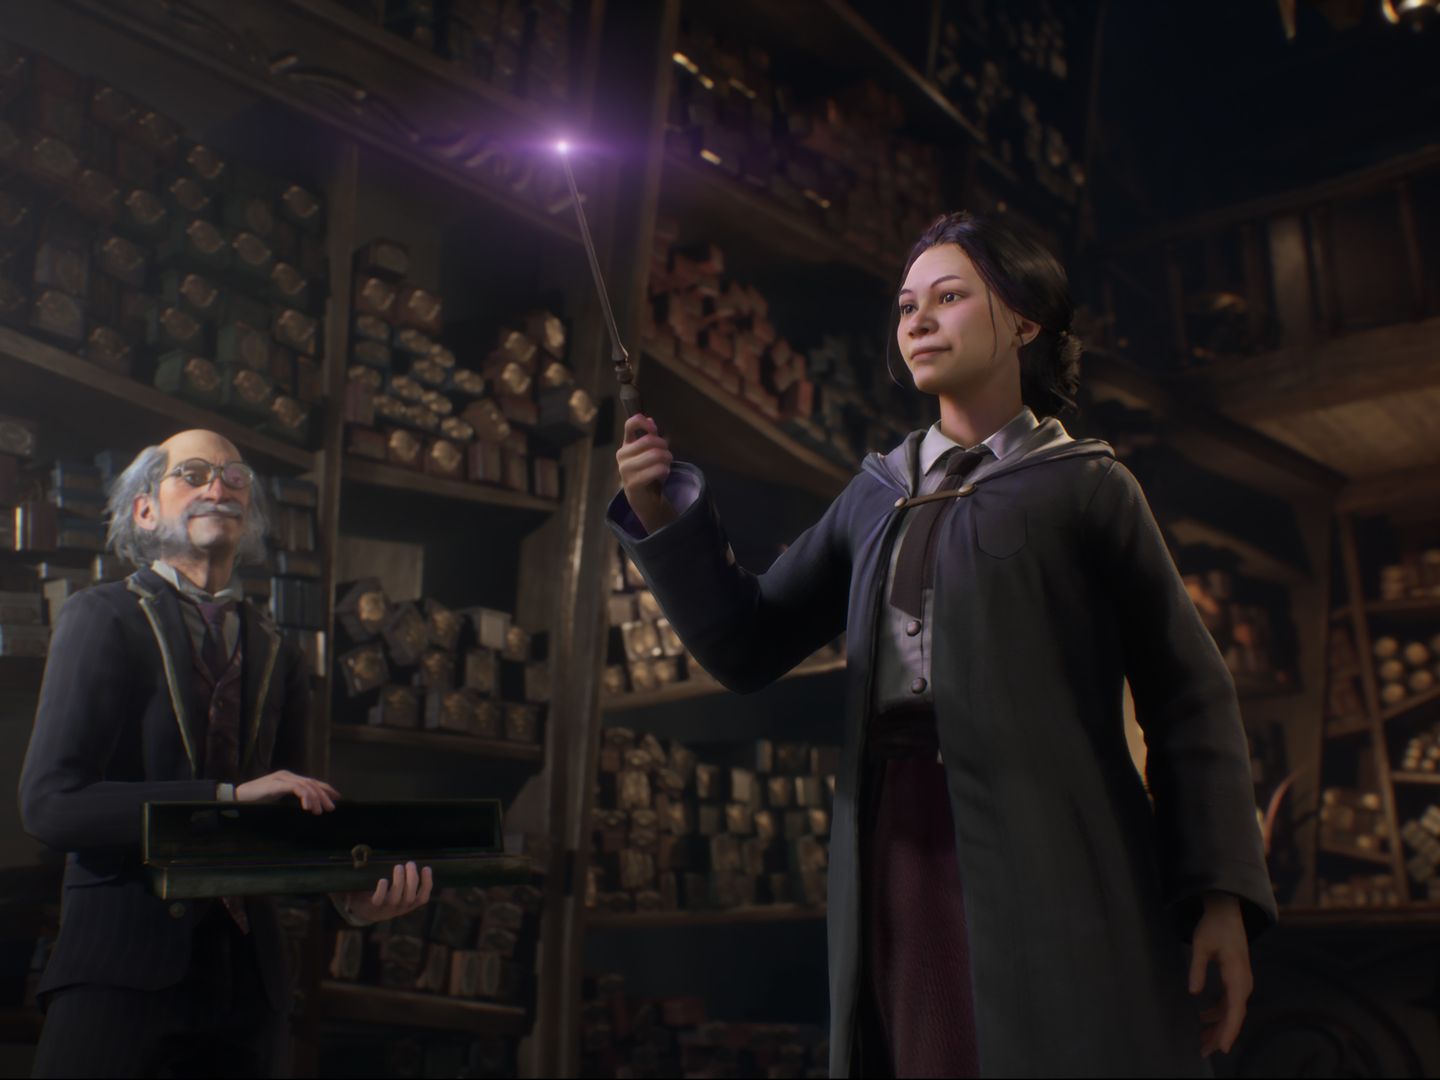 The Harry Potter Fan Club app rolls out in new countries: here's everything  you need to know about it